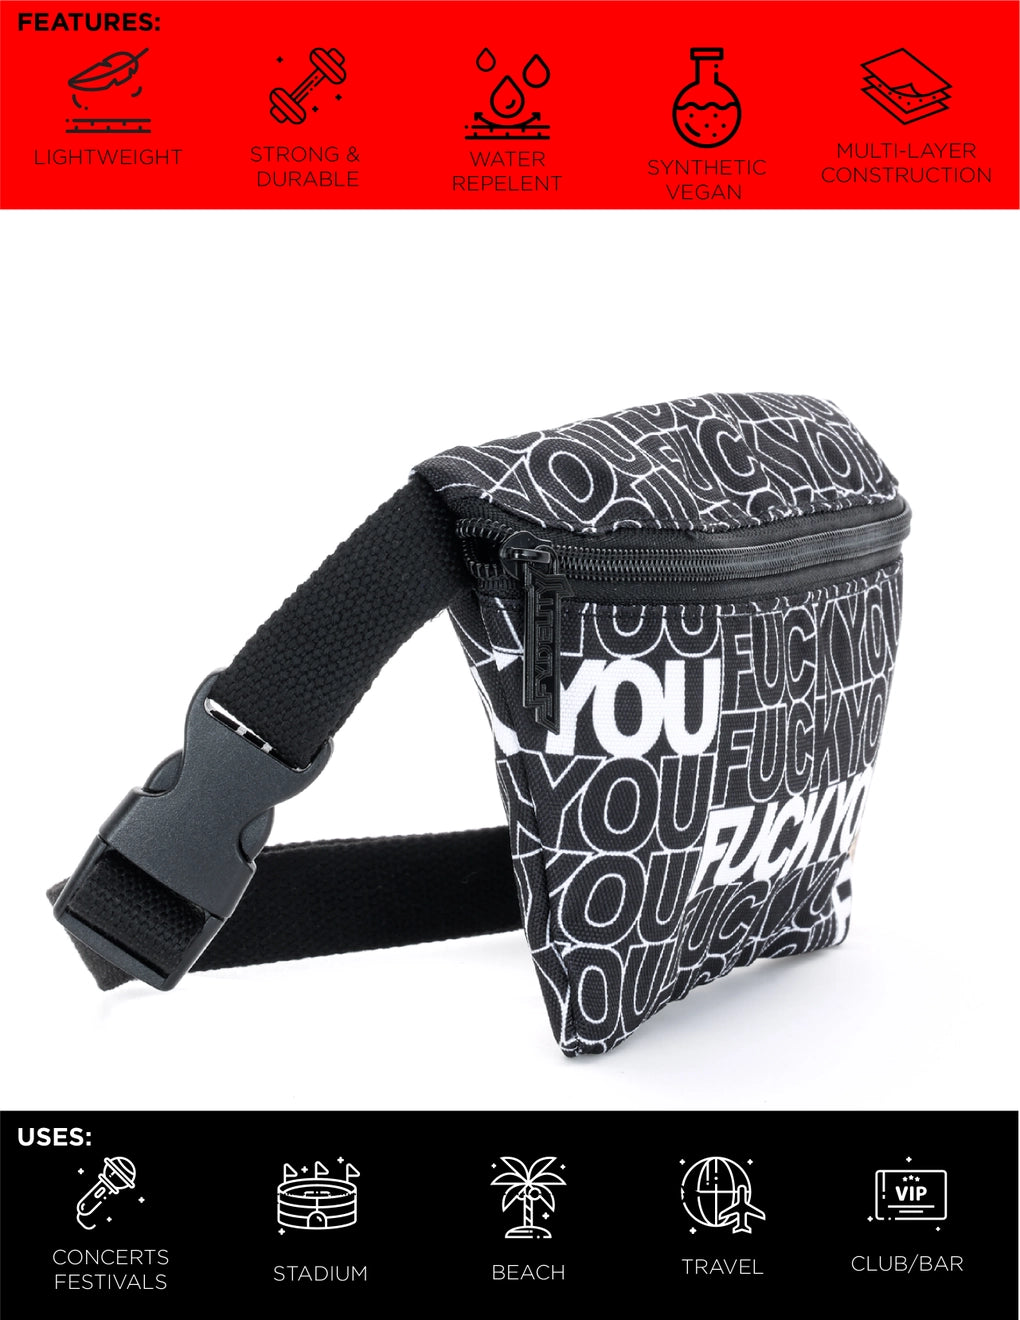 FANNY PACK-FUCK YOU